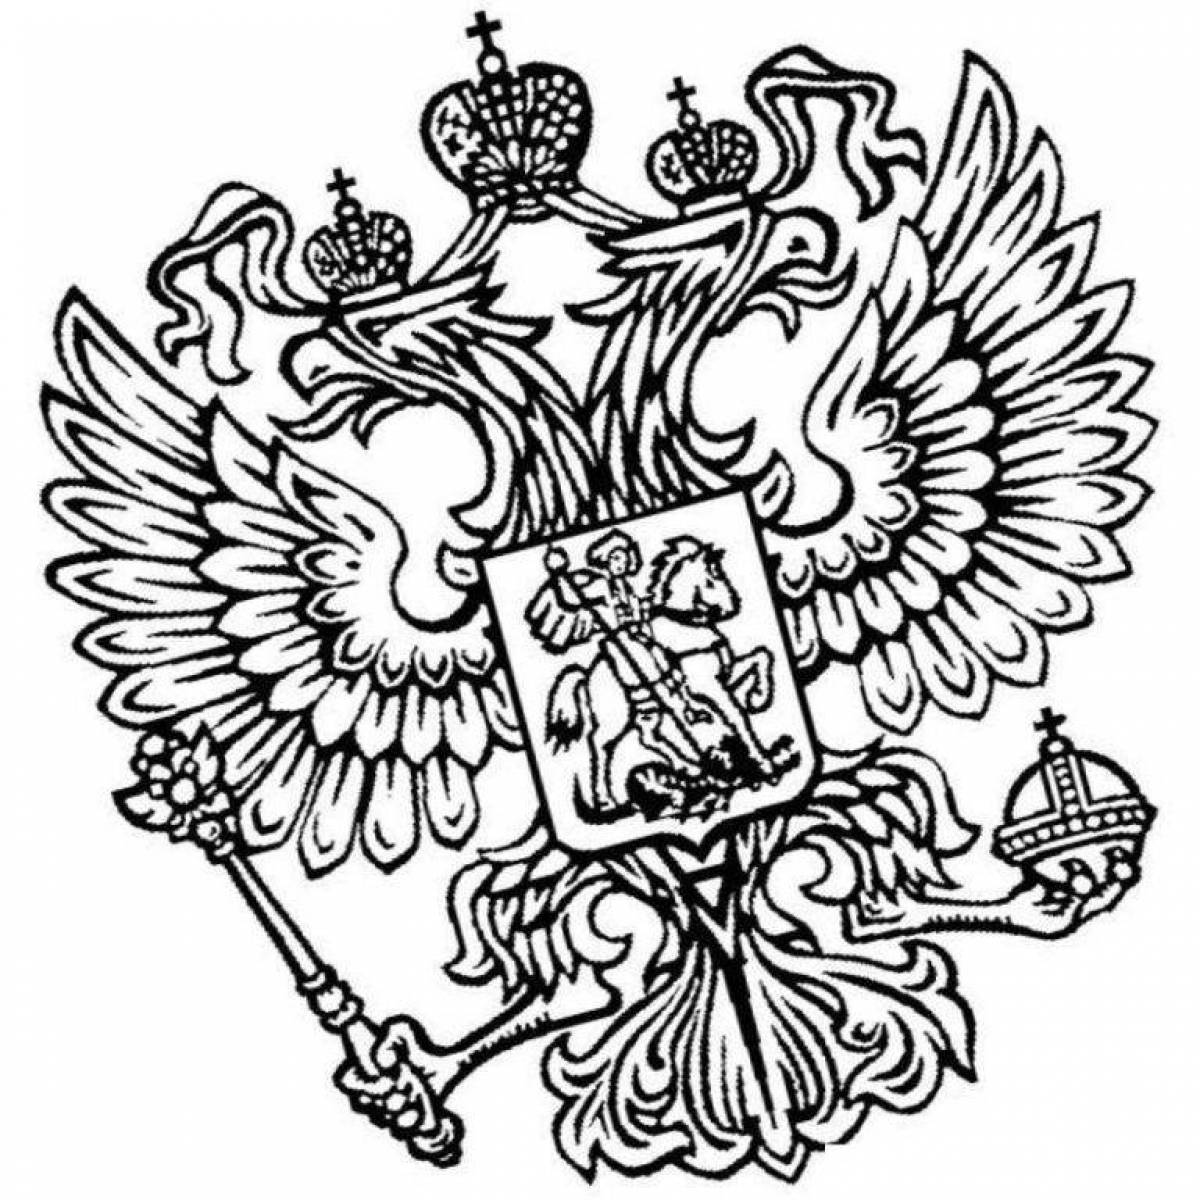 Russian coat of arms #12